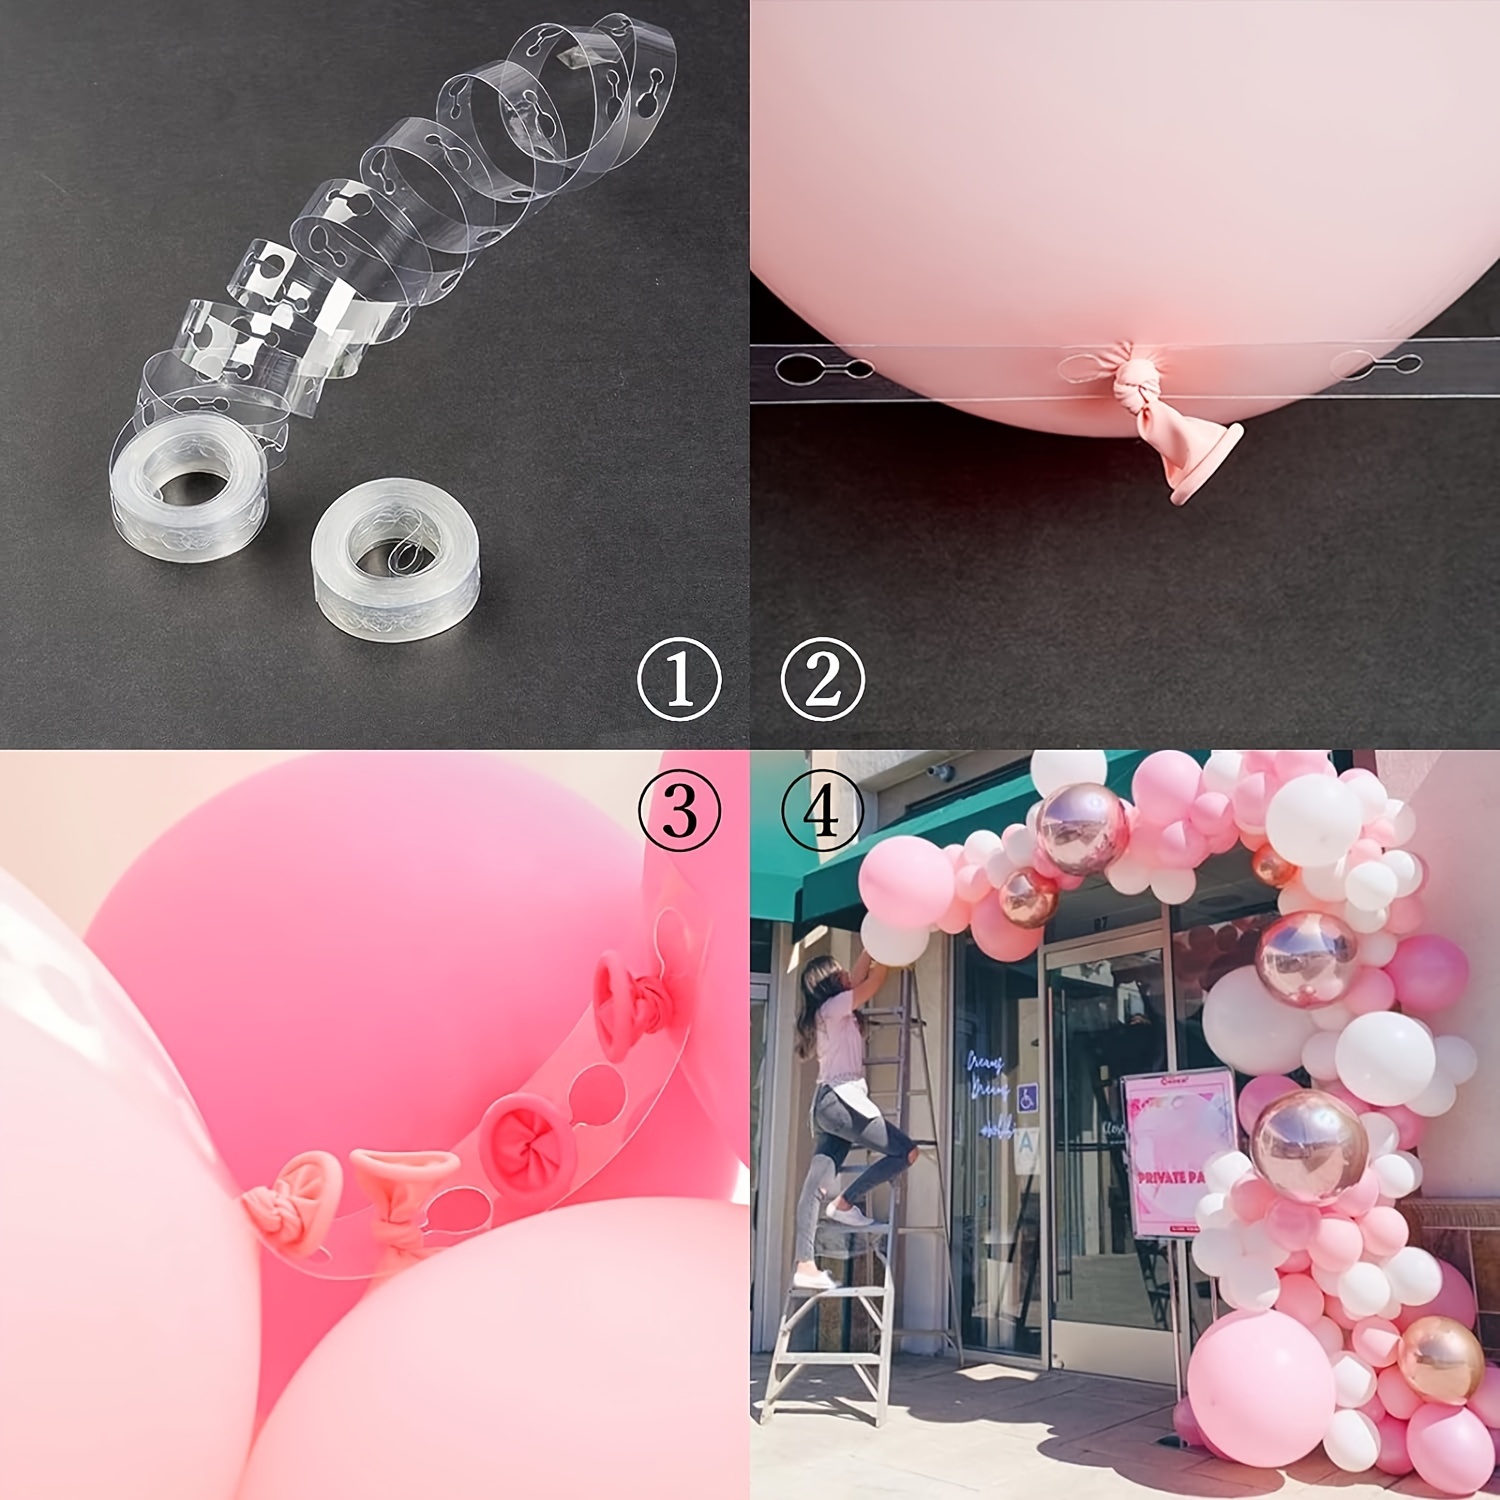 Balloon Tying Knot Tool Balloon Garland/arch Accessory 